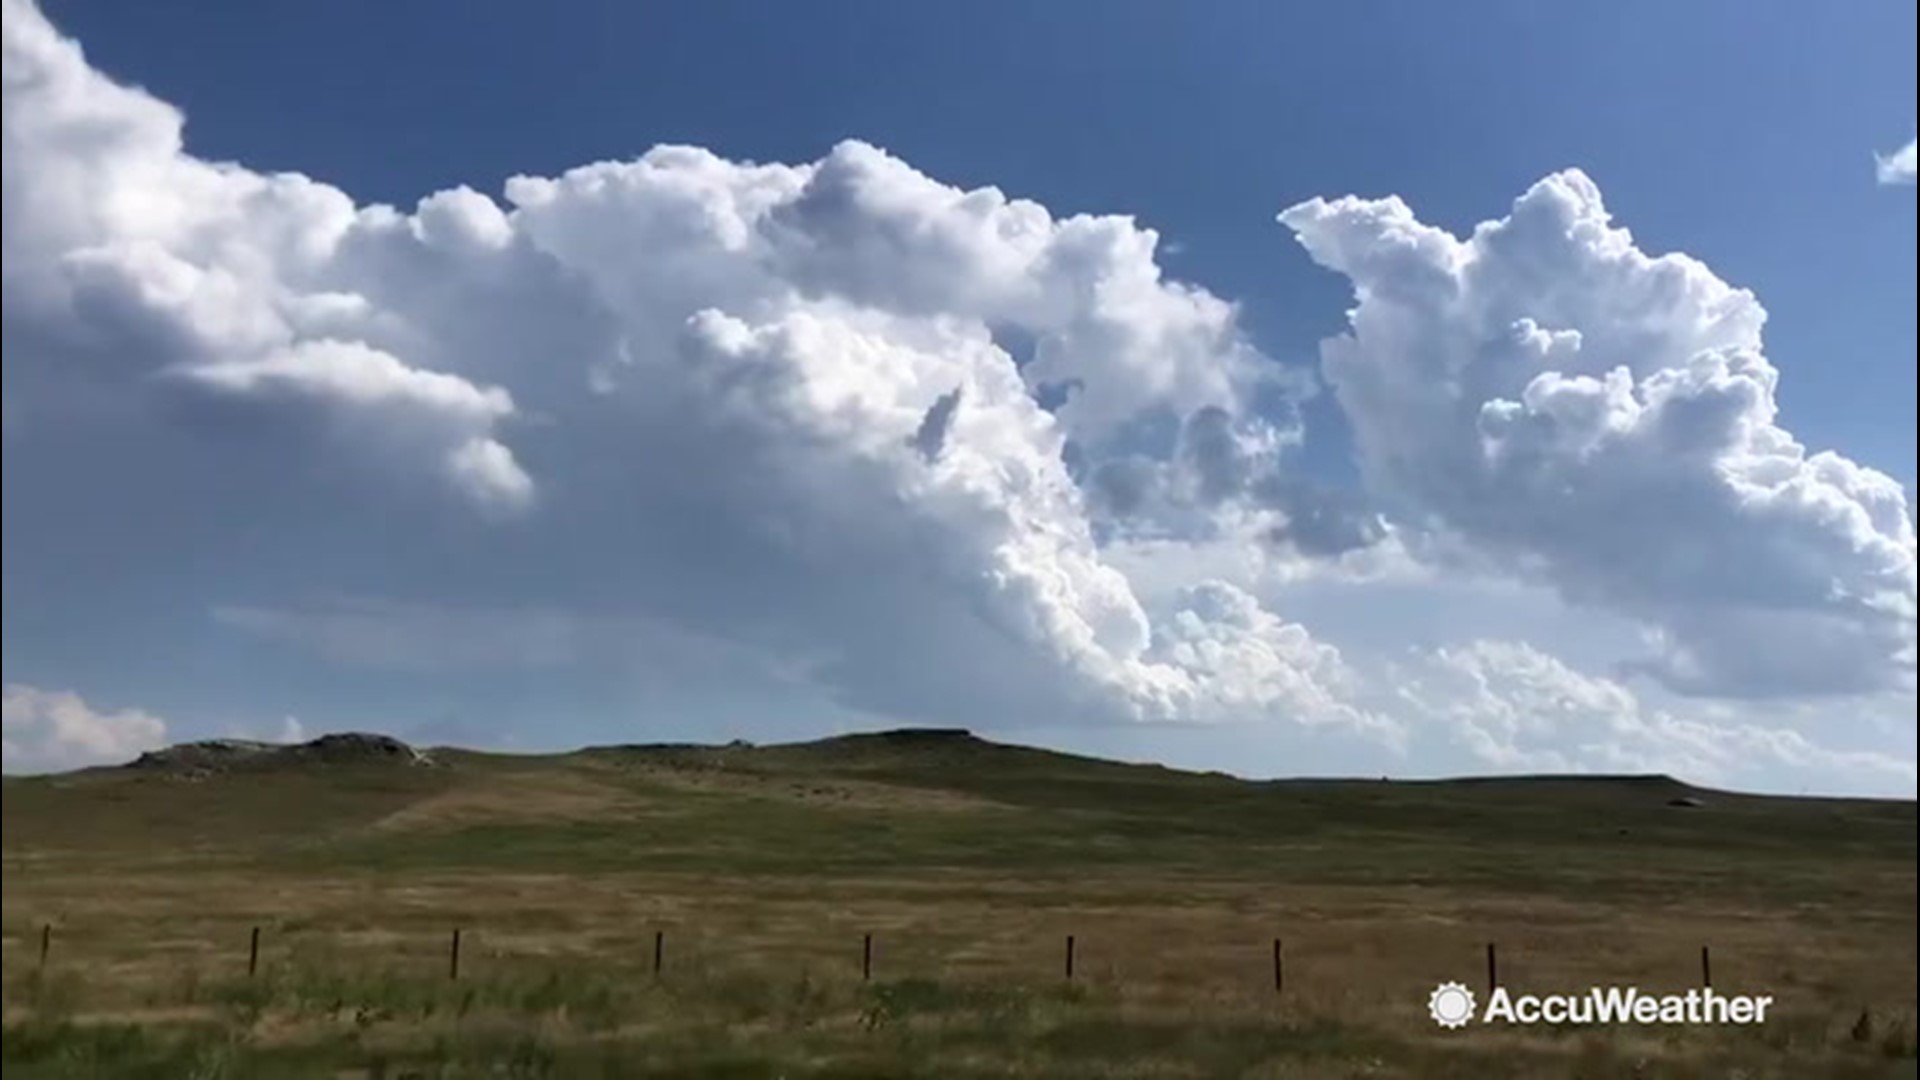 Giant cumulus clouds were spotted near Sidney, Nebraska on Aug. 14. The clouds are expected to bring severe thunderstorms to northeast Colorado as they mature.